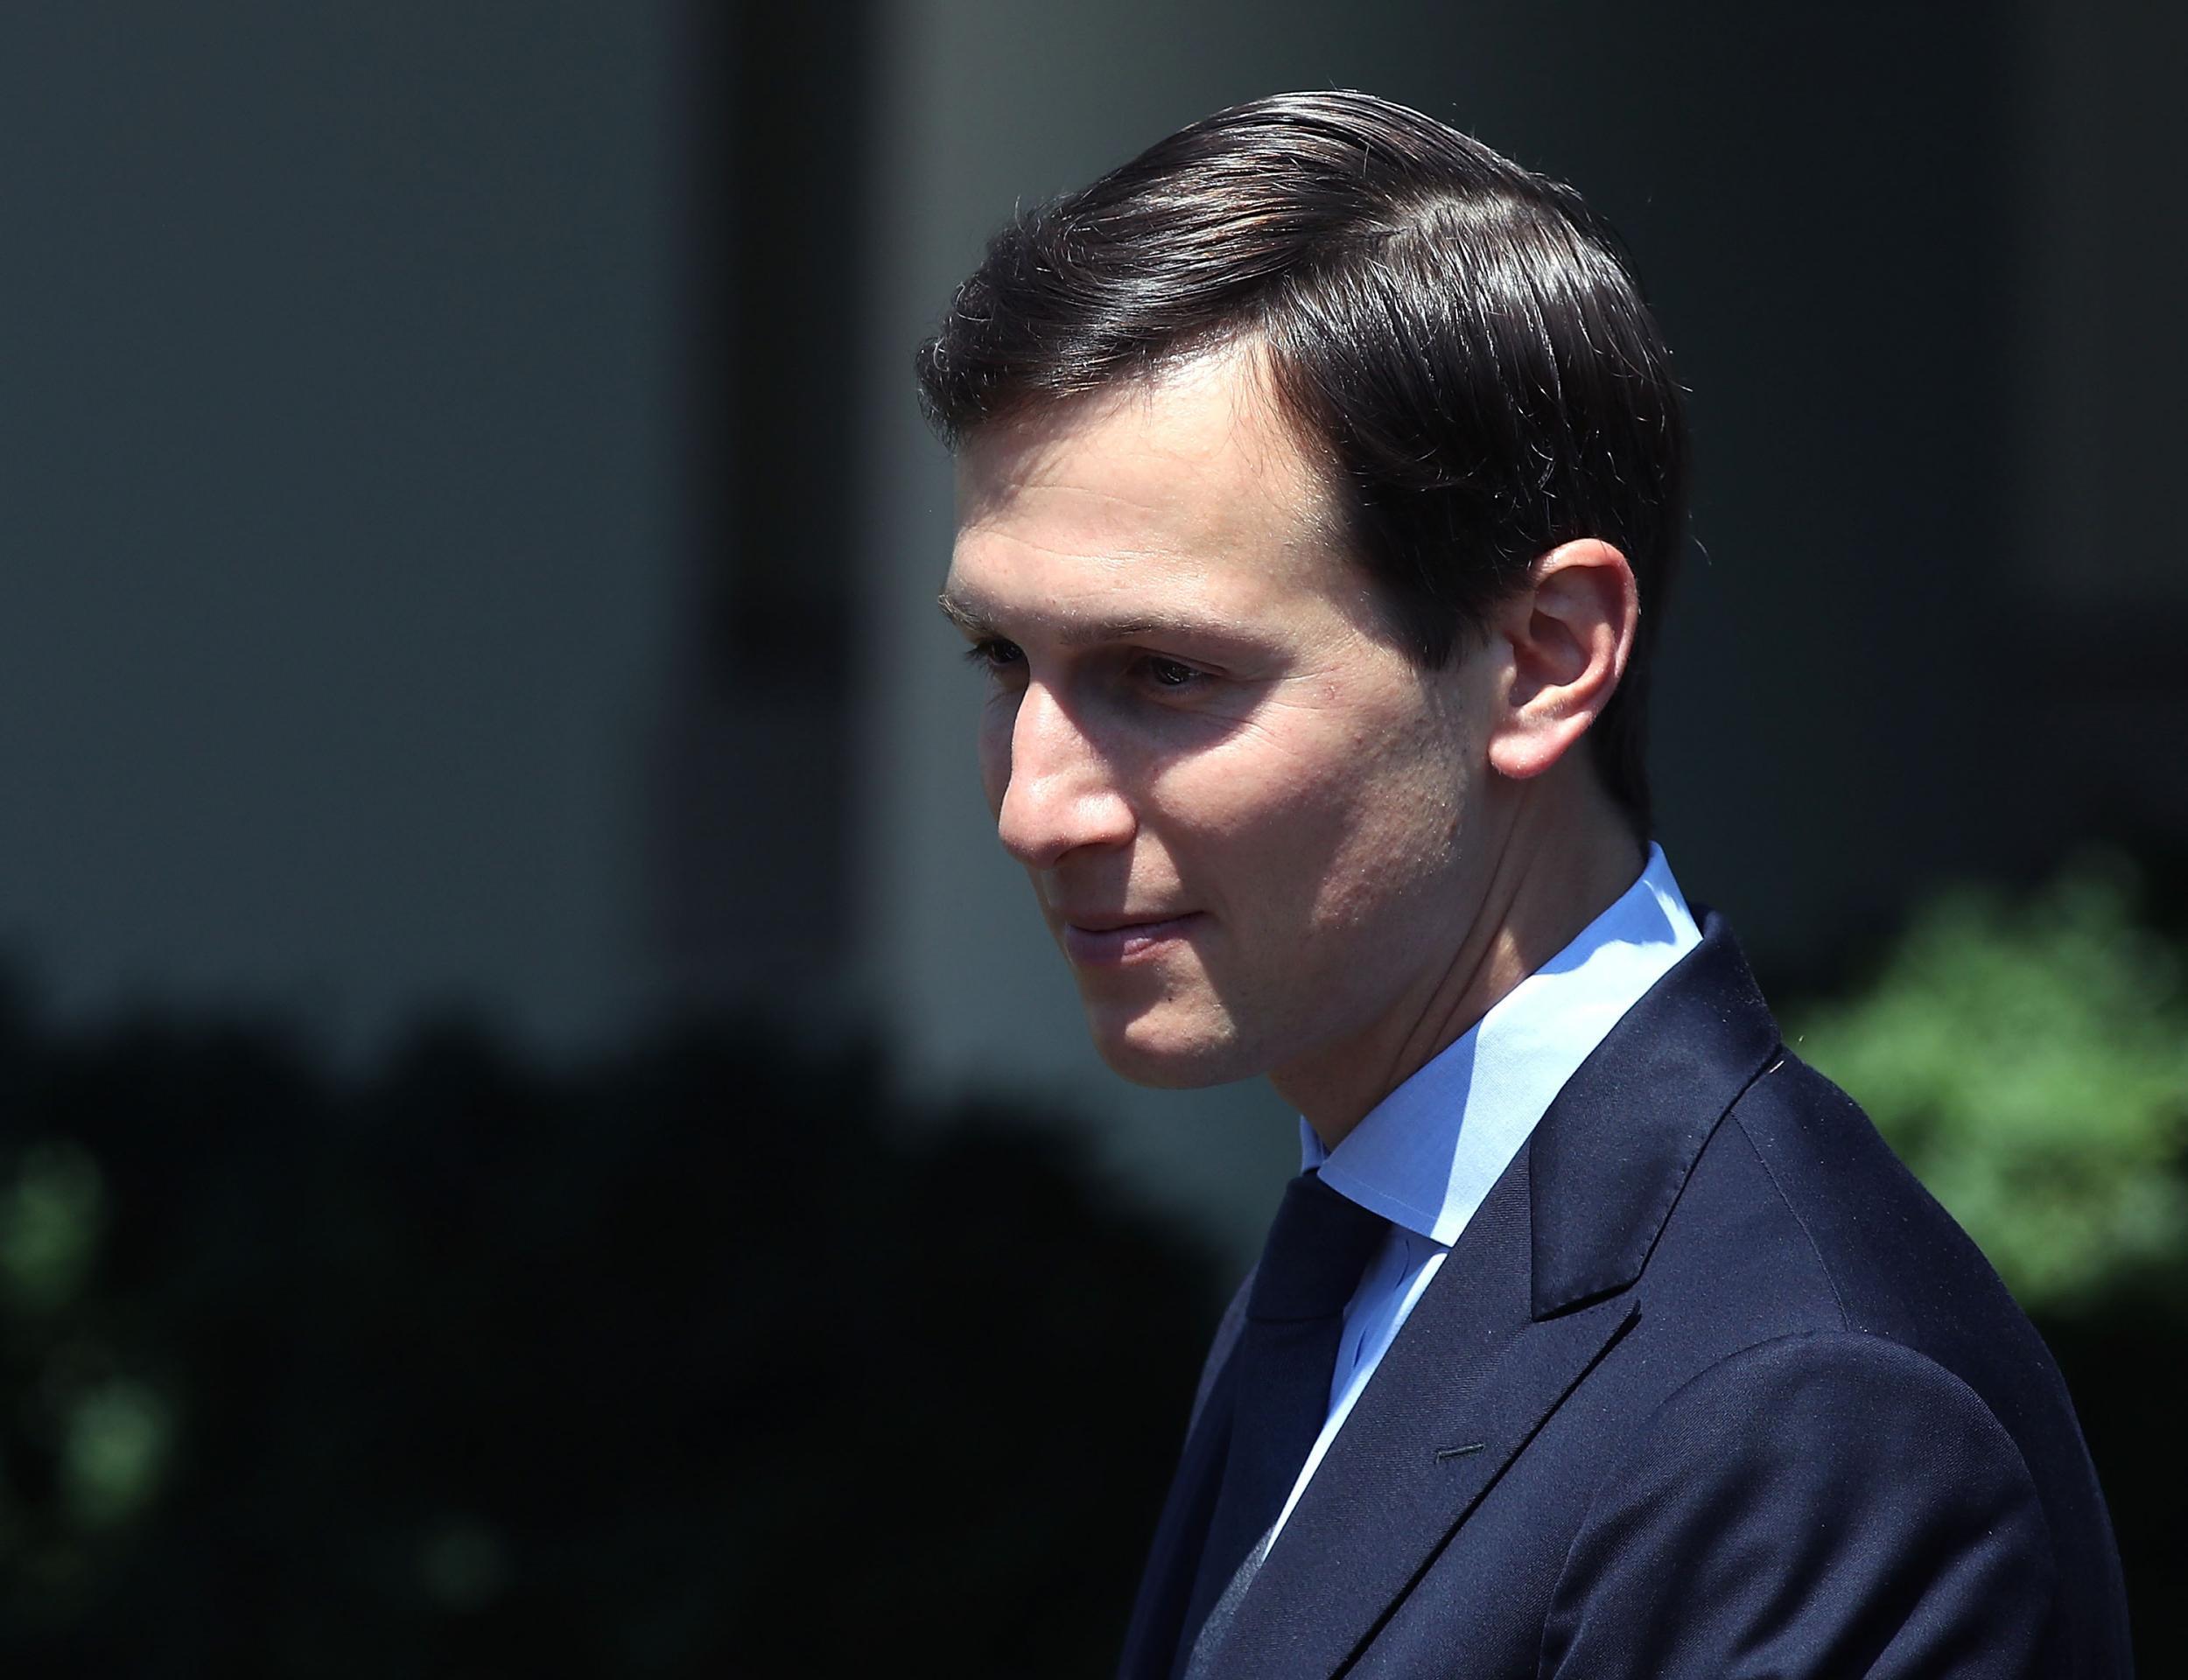 Jared Kushner attends a joint statement by US President Donald Trump and South Korean President Moon Jae-in in the Rose Garden